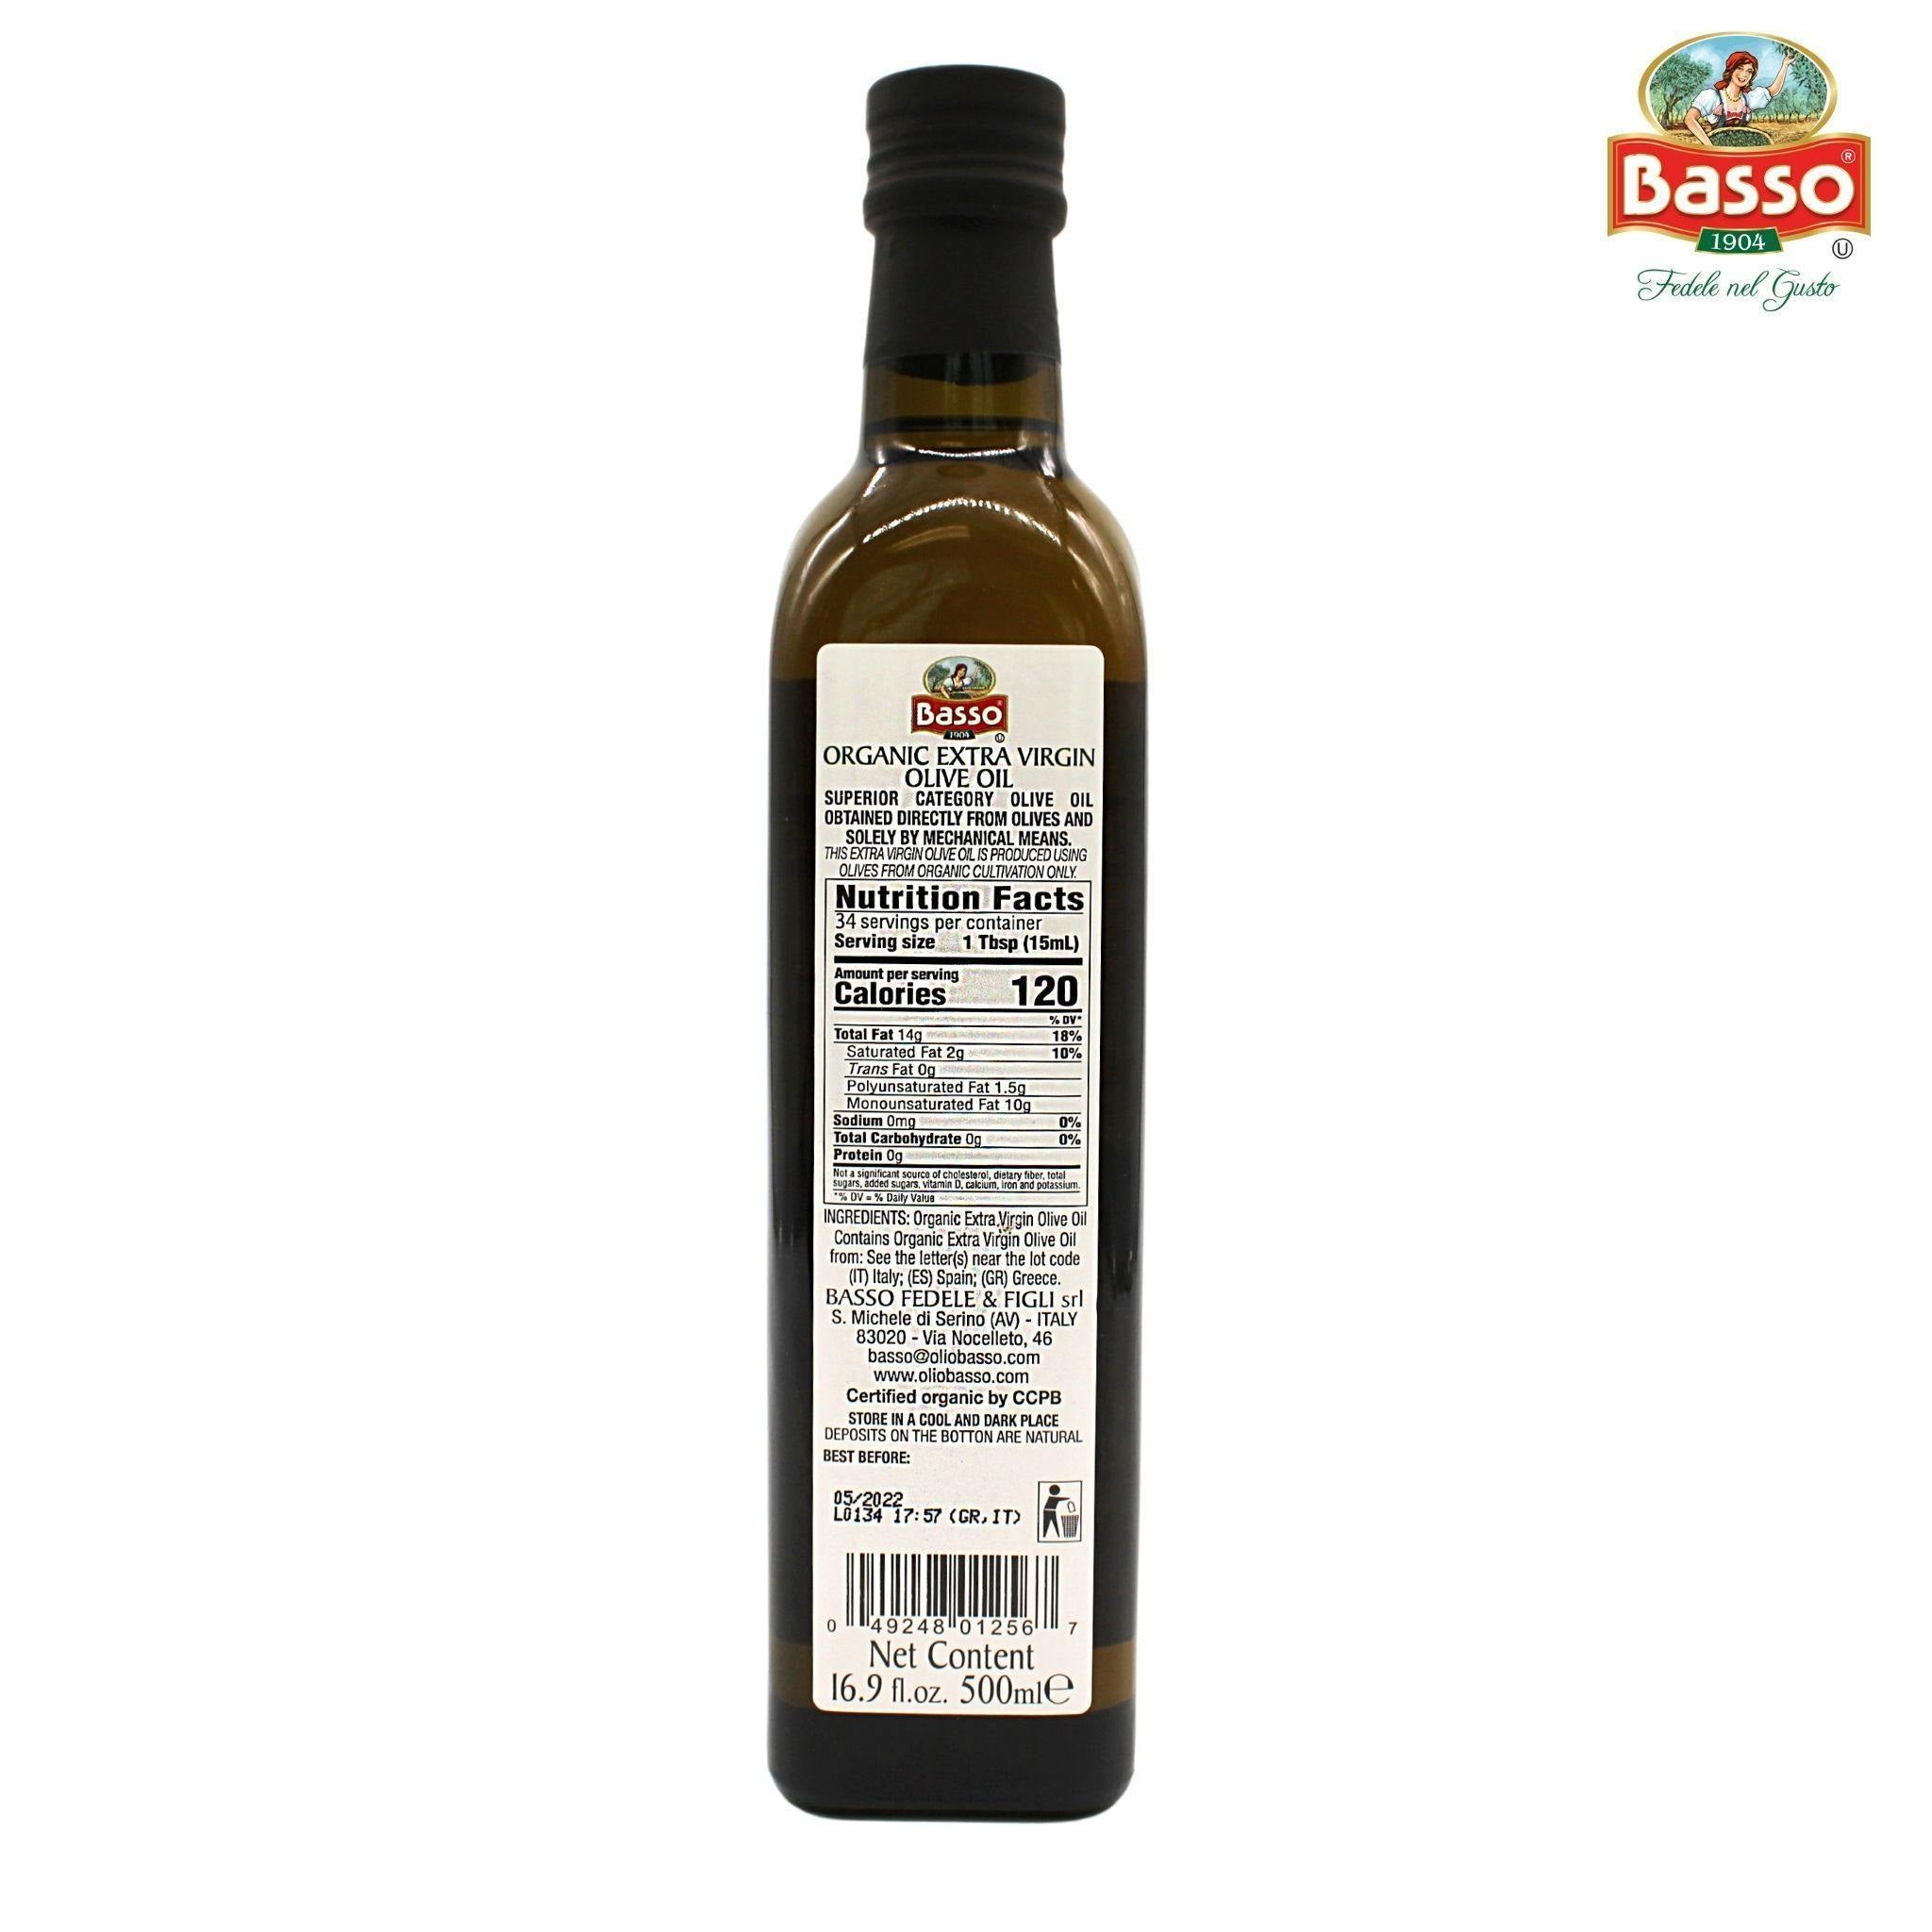 Premium "First Cold Pressed" Extra Virgin Olive Oil 16.9 oz.